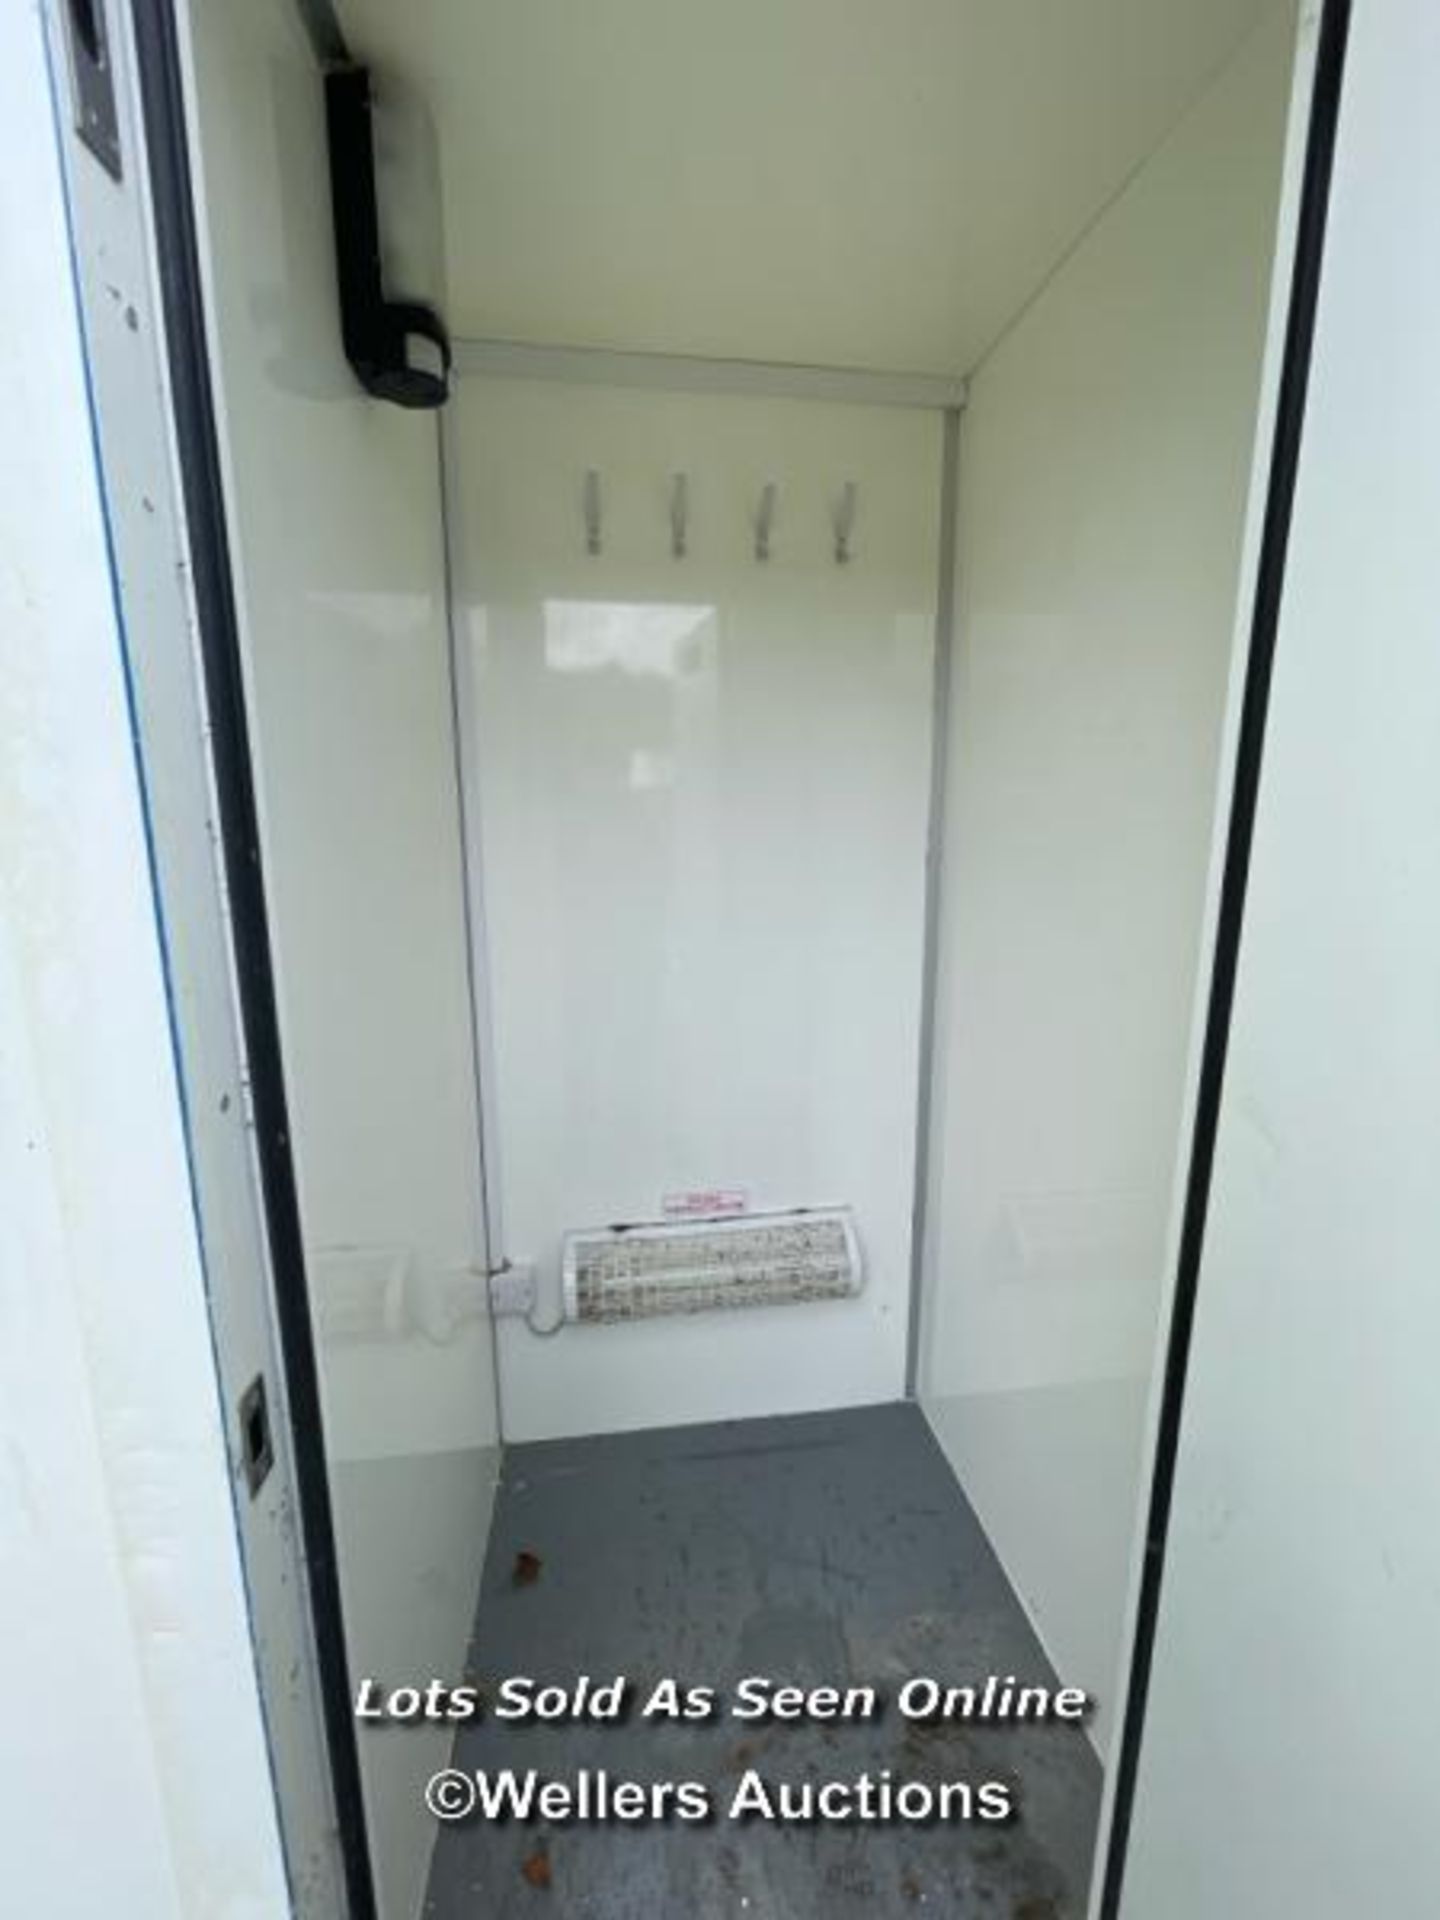 6 PERSON 12 X 7.5FT AJC EASY CABIN TOWABLE WELFARE UNIT, INCLUDES WASH BASIN, KETTLE, MICROWAVE, - Image 12 of 19